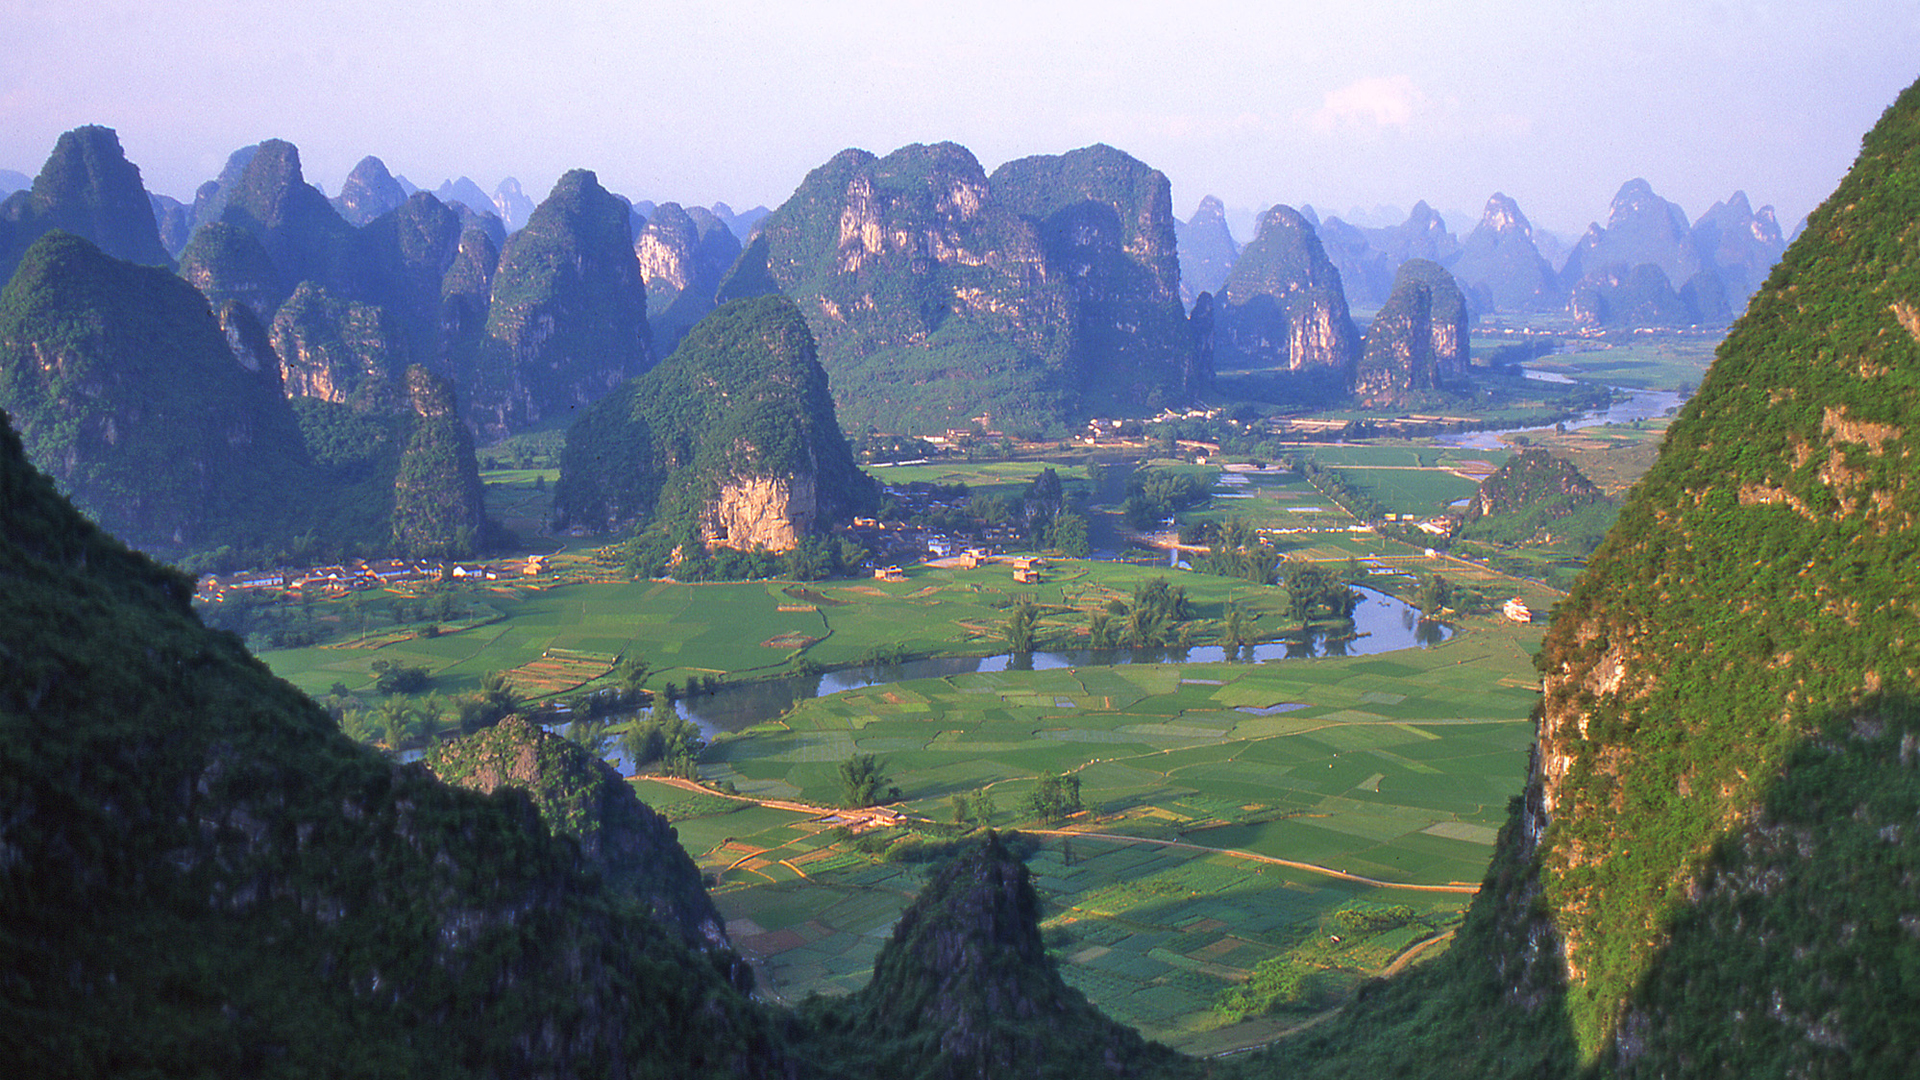 Guilin Featured Image